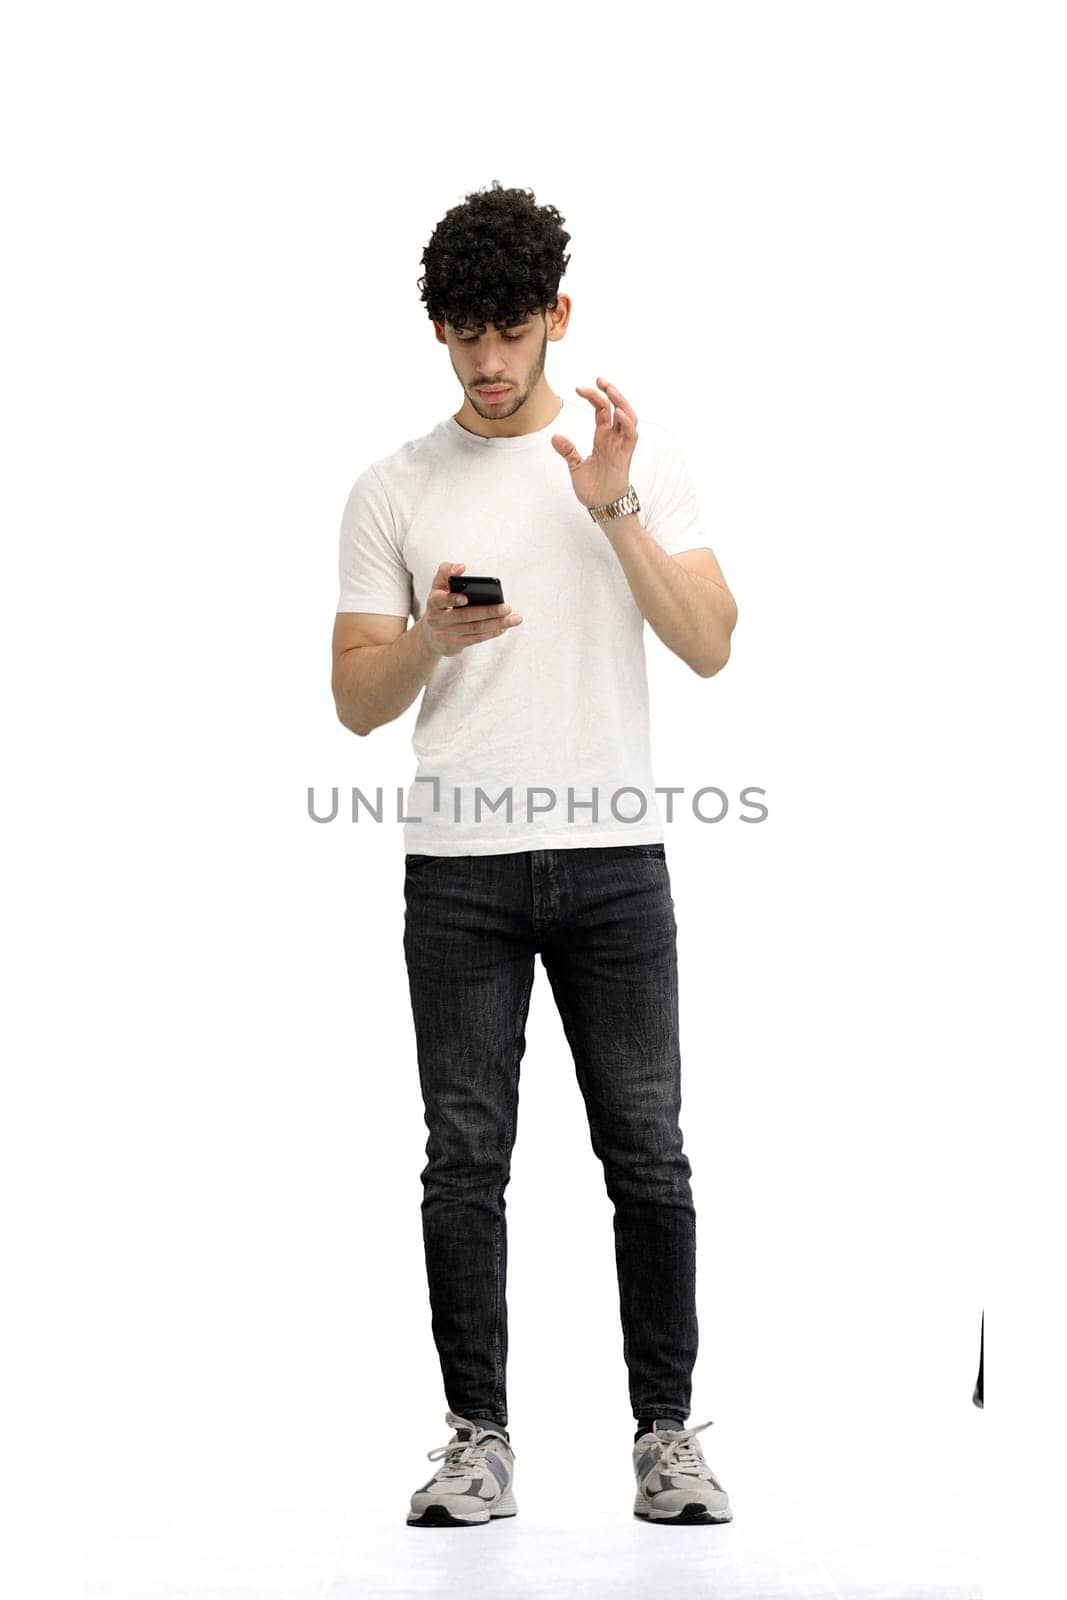 A man, on a white background, in full height, with bags and a phone.